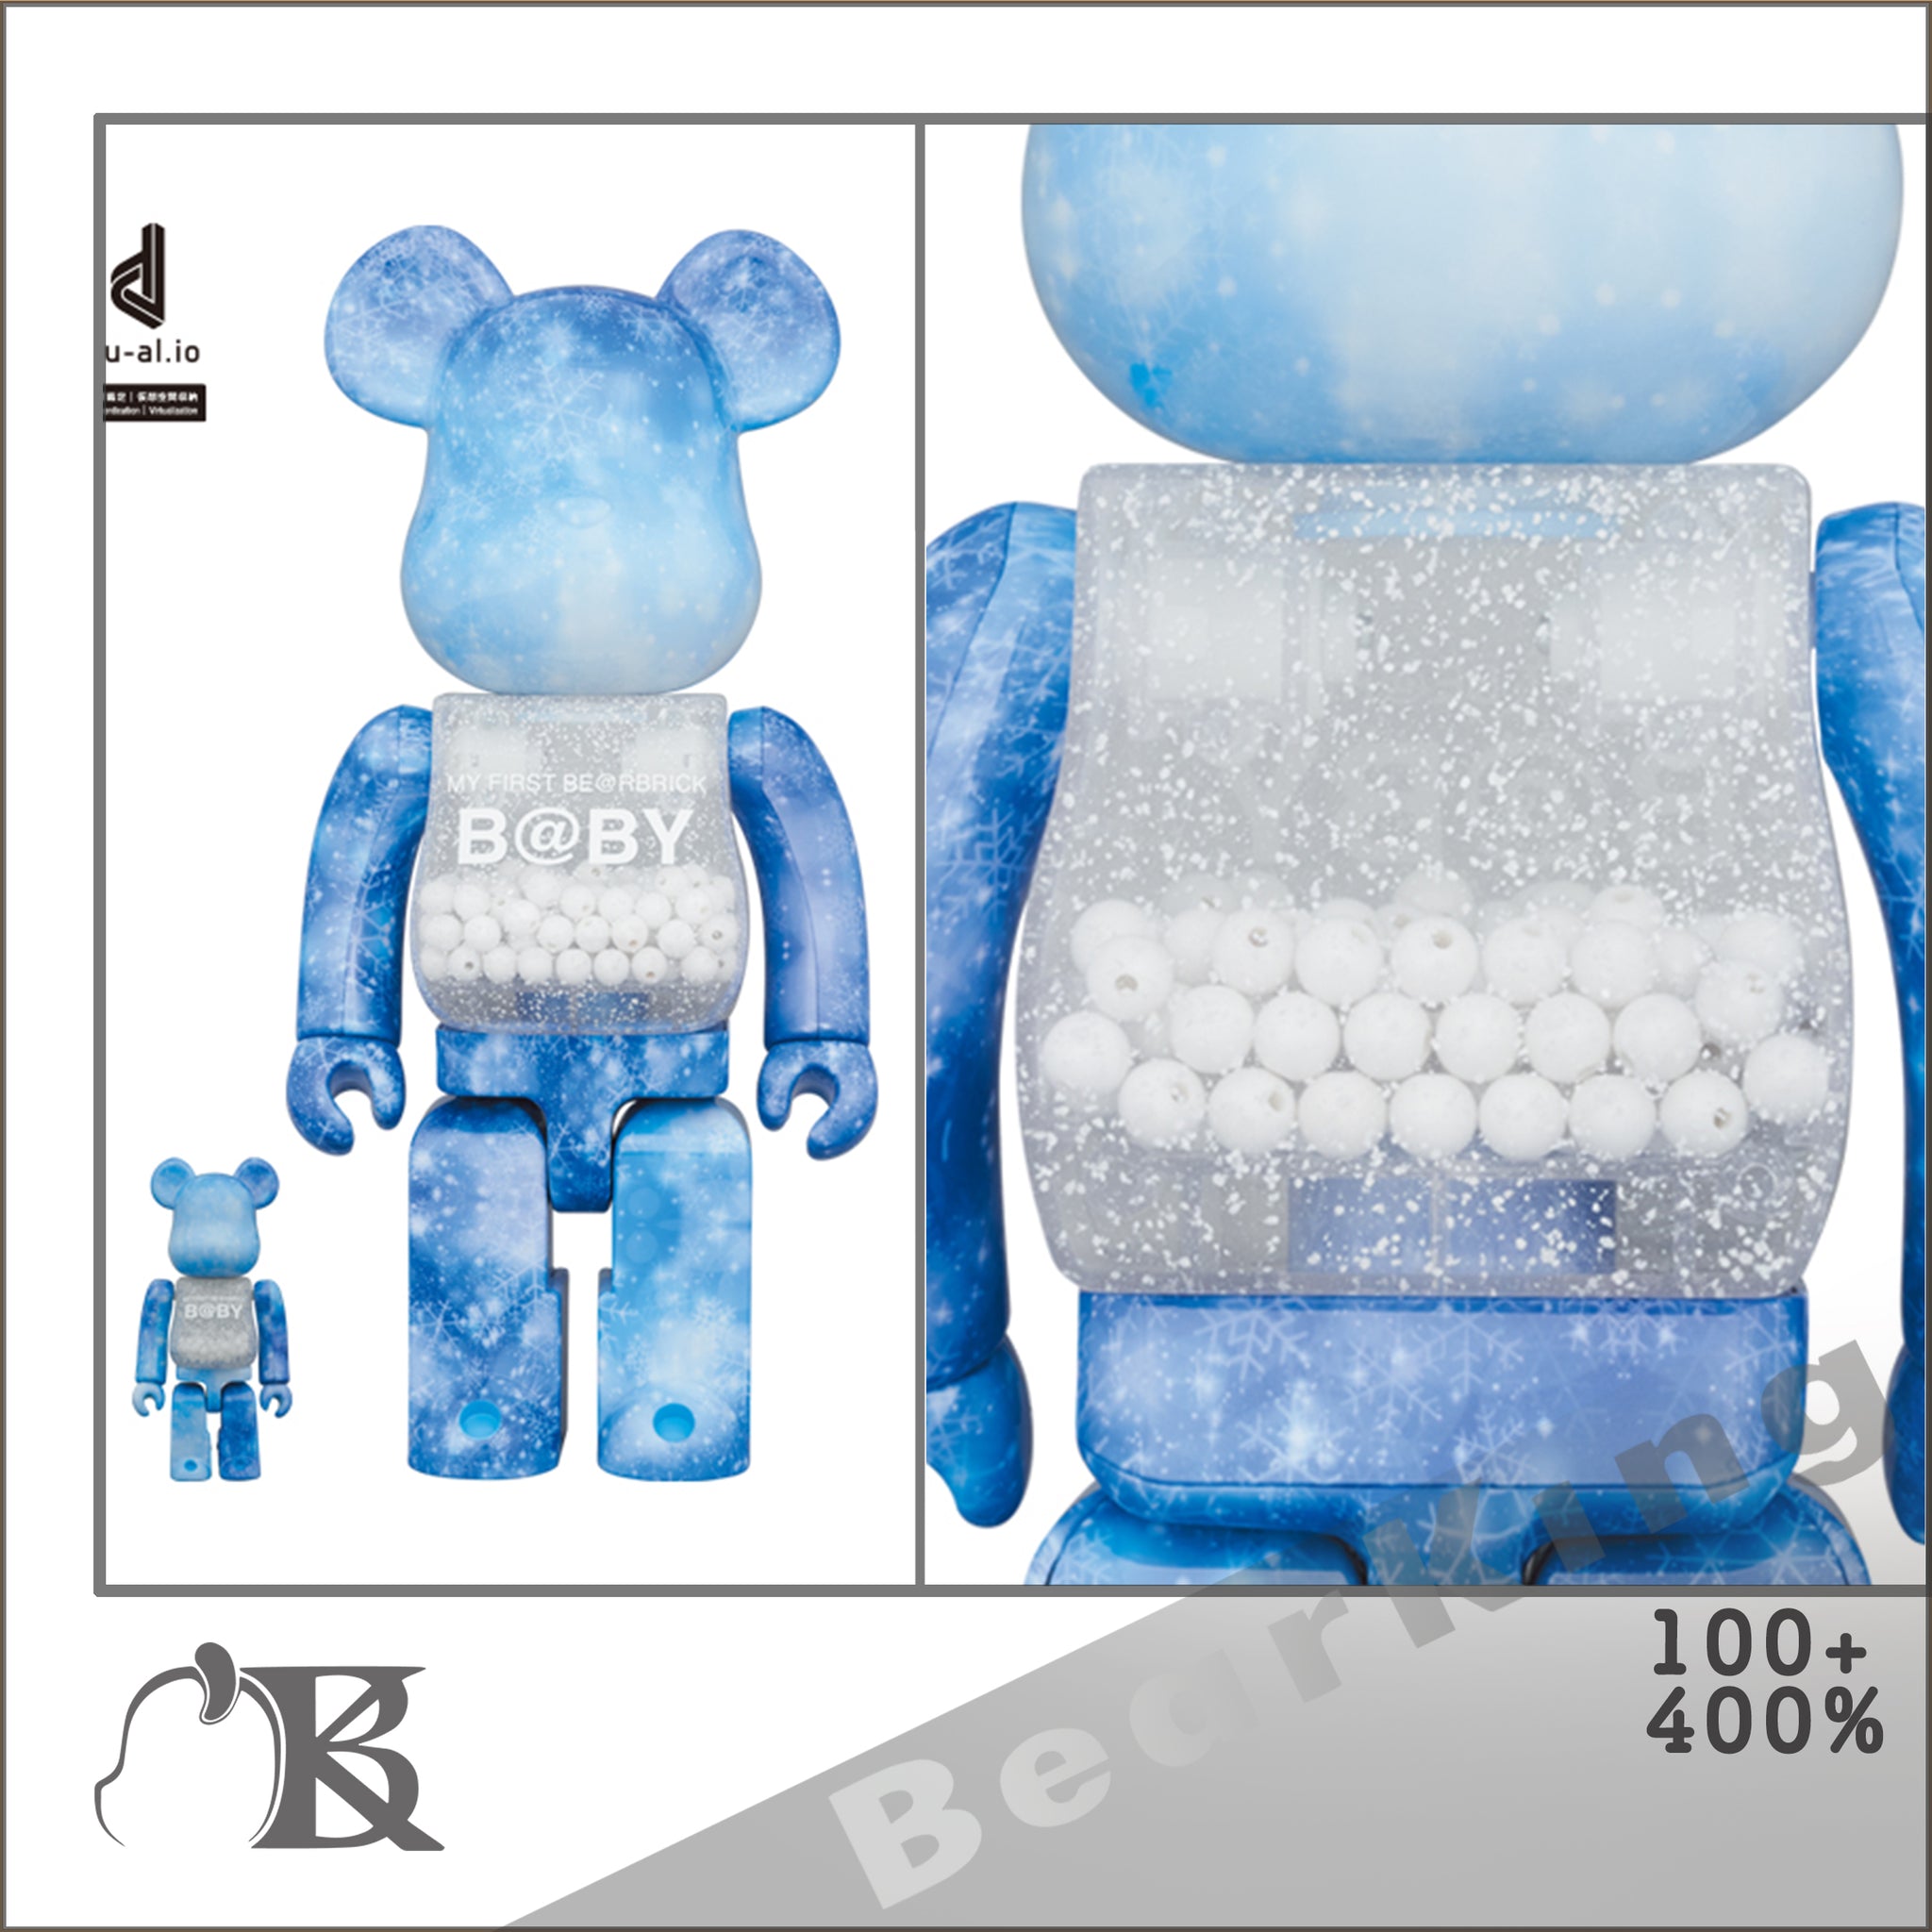 BE@RBRICK B@BY CRYSTAL OF SNOW 100% 400％-